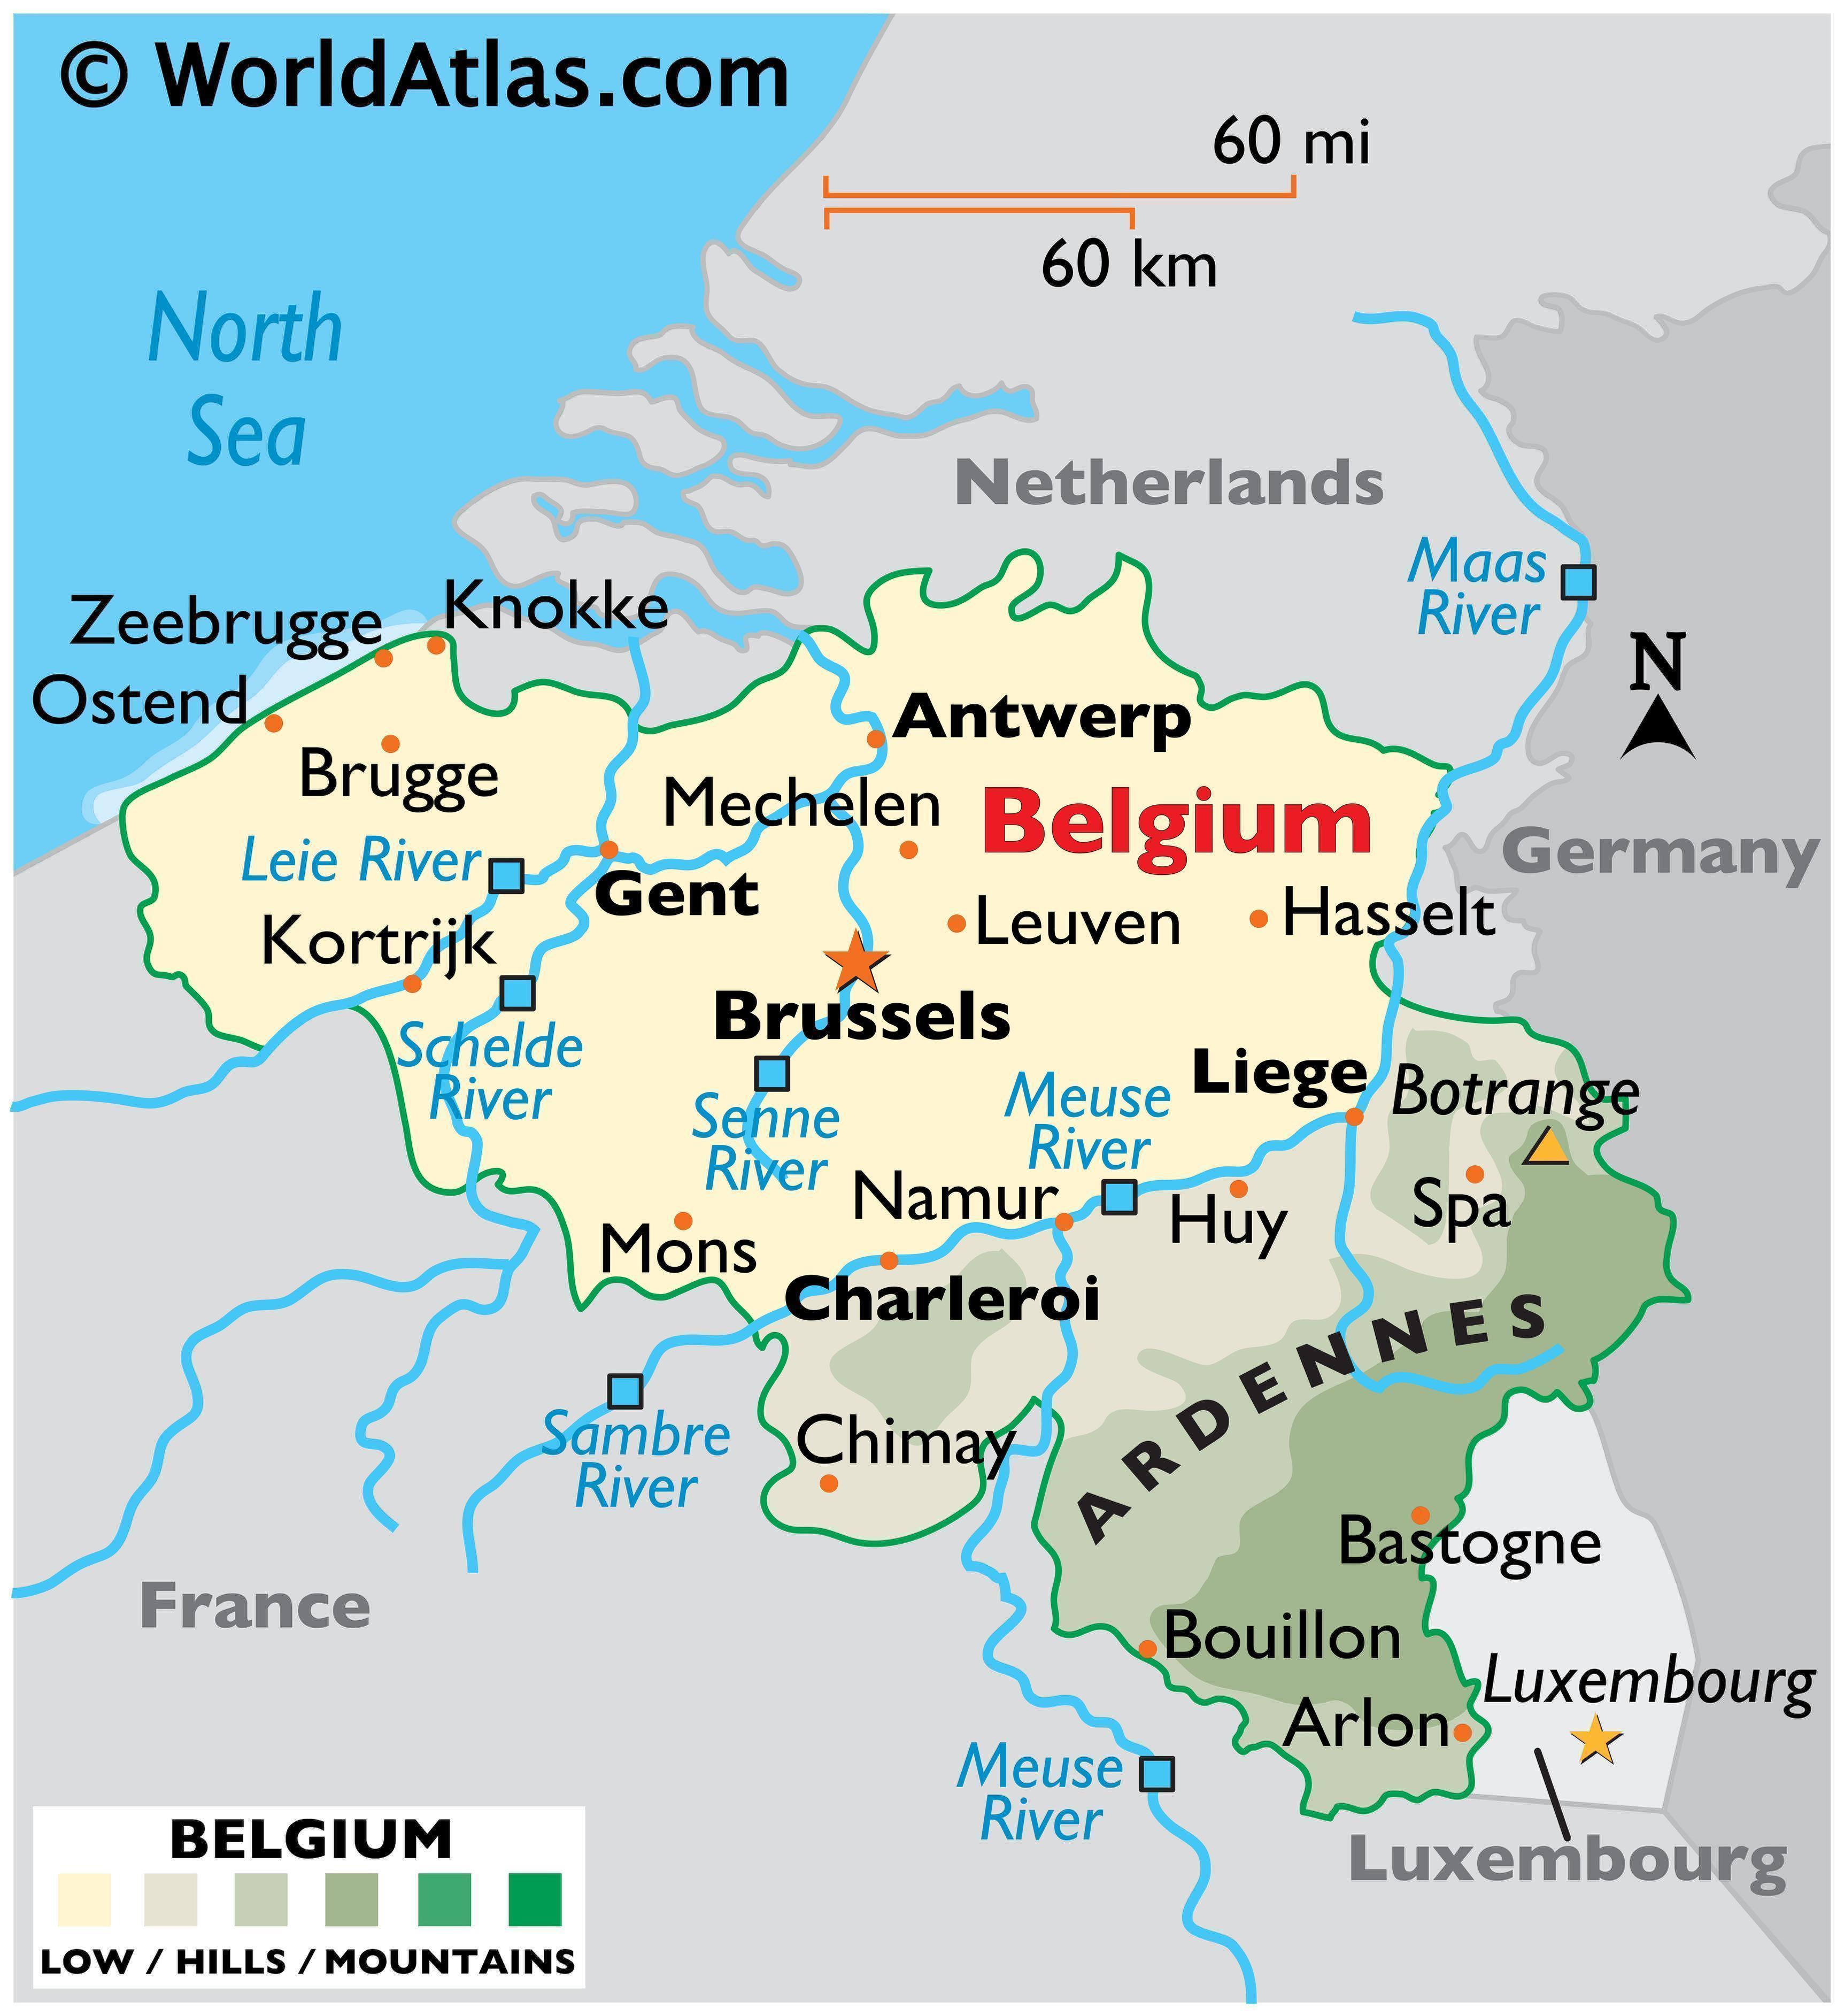  /><br /><br/><p>Brussels On Map</p></center></center>
<div style='clear: both;'></div>
</div>
<div class='post-footer'>
<div class='post-footer-line post-footer-line-1'>
<div style=